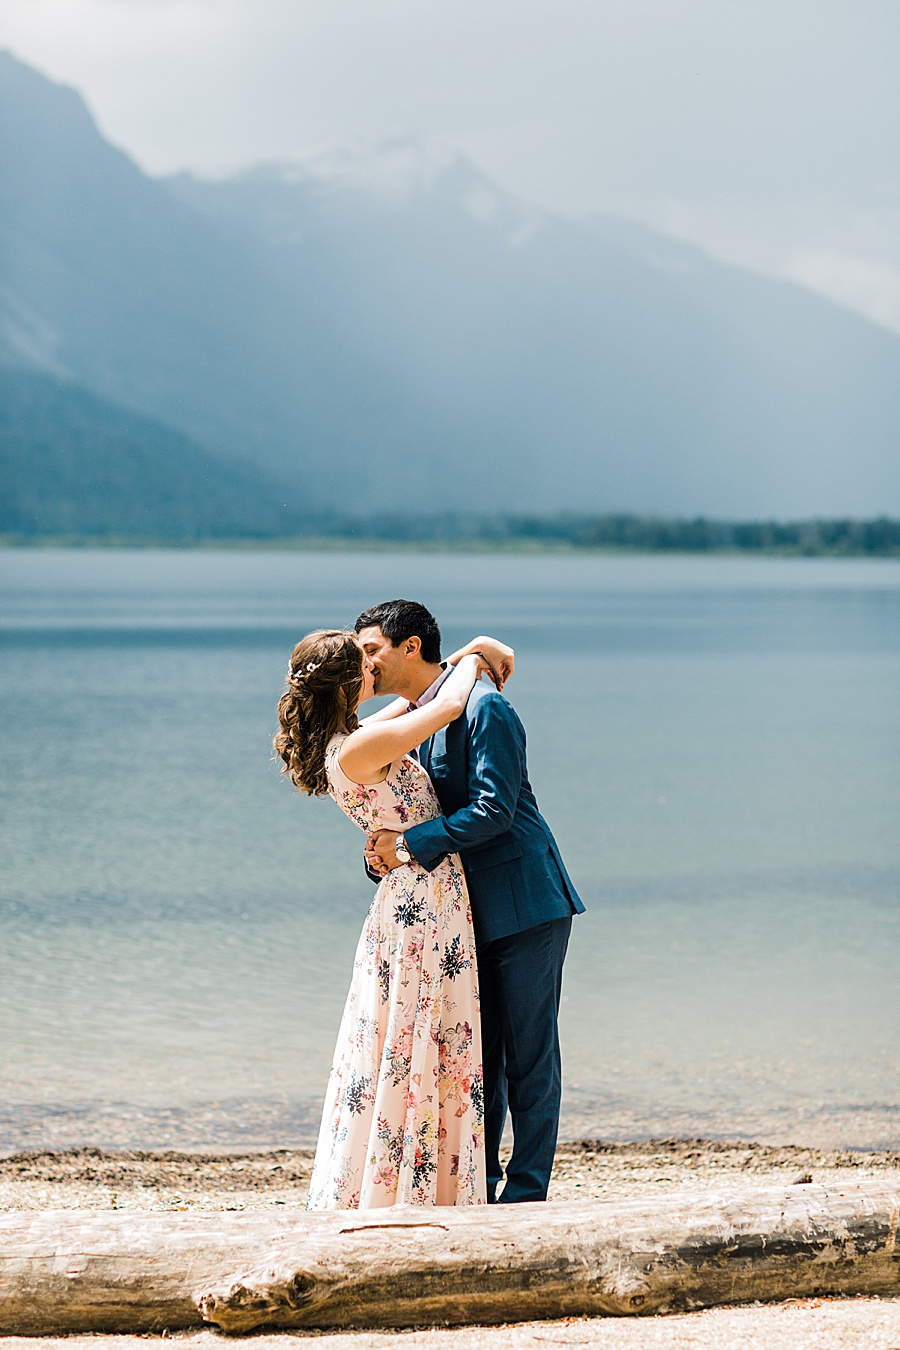 A couple gets married on a sunny spring day in Leavenworth, Washington. The bride is wearing a pink floral wedding gown.